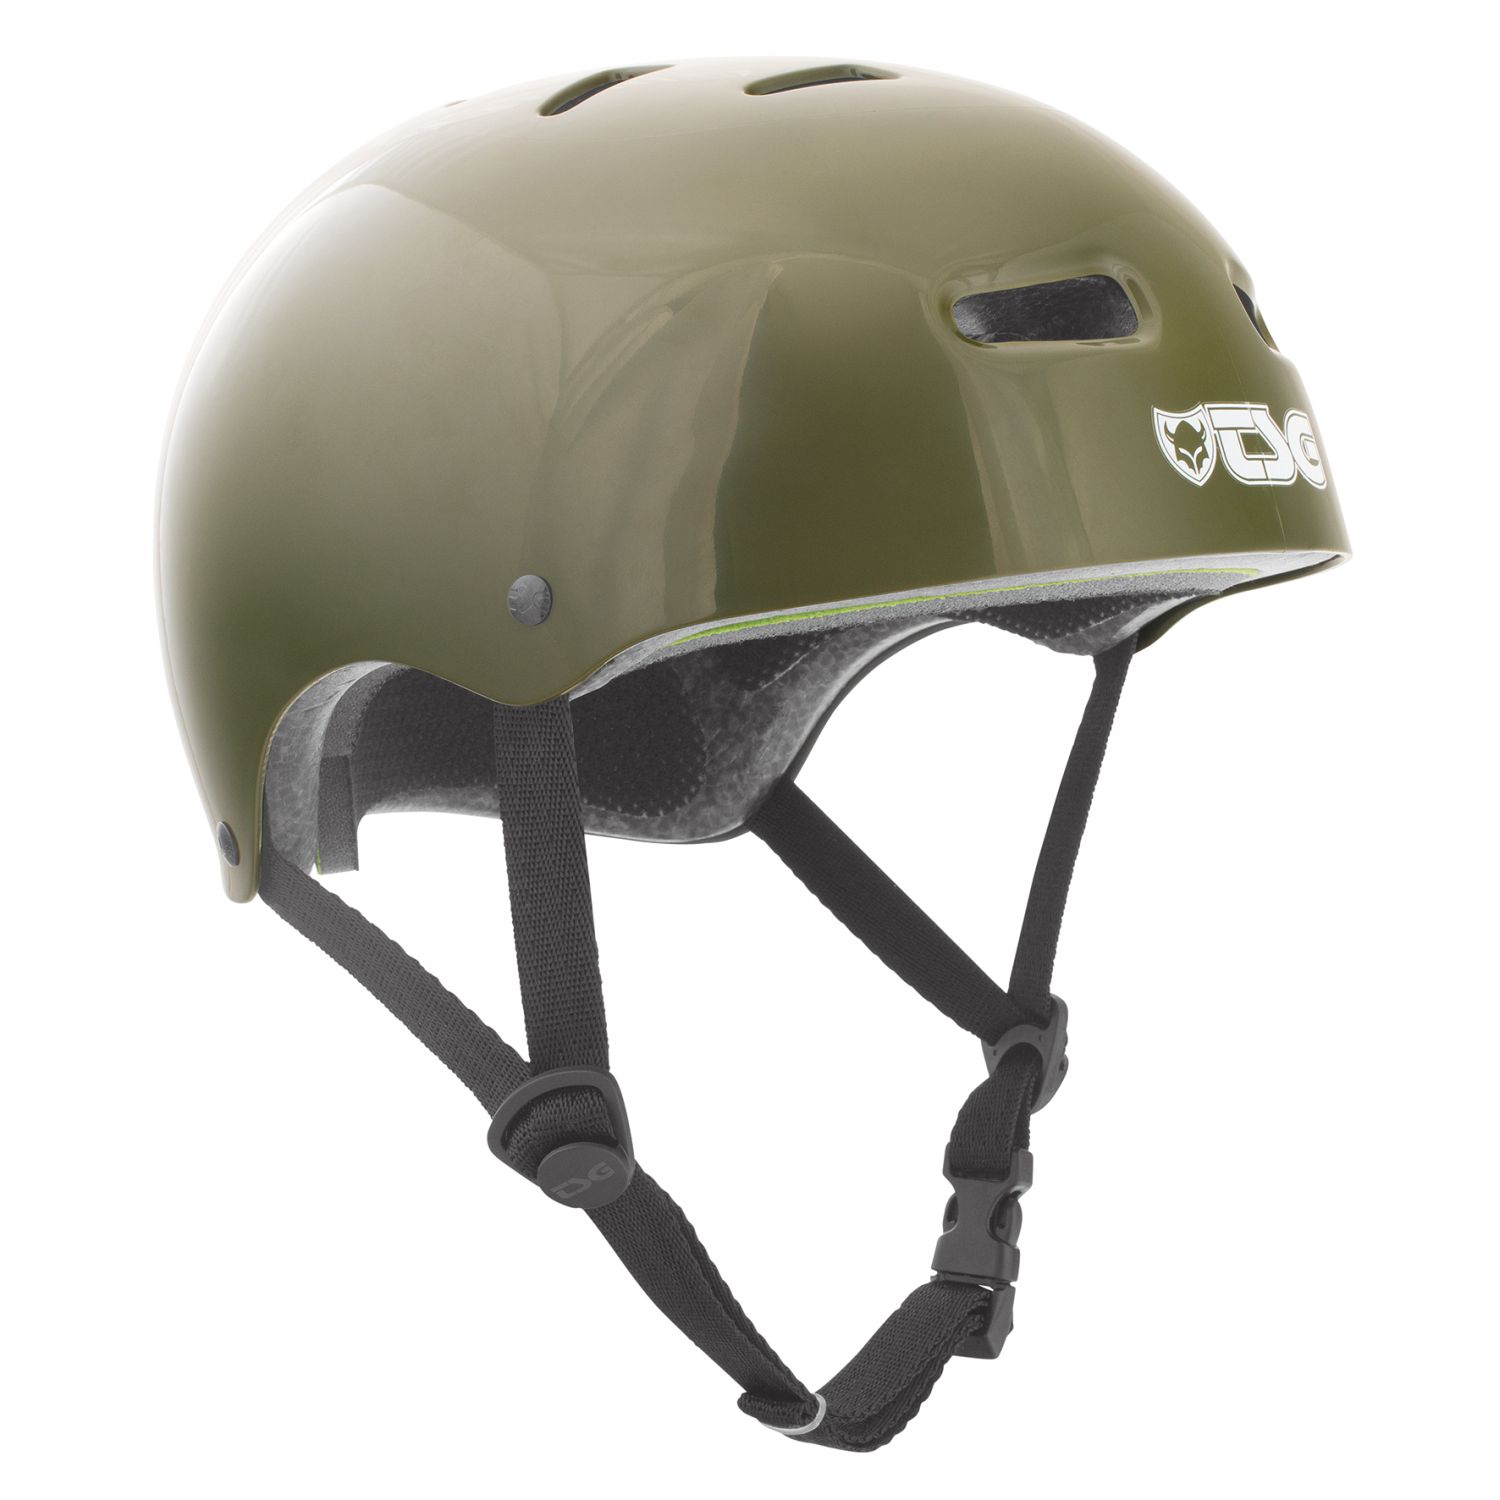 TSG Casque BMX/Dirt Skate/BMX Injected Color - Injected Olive